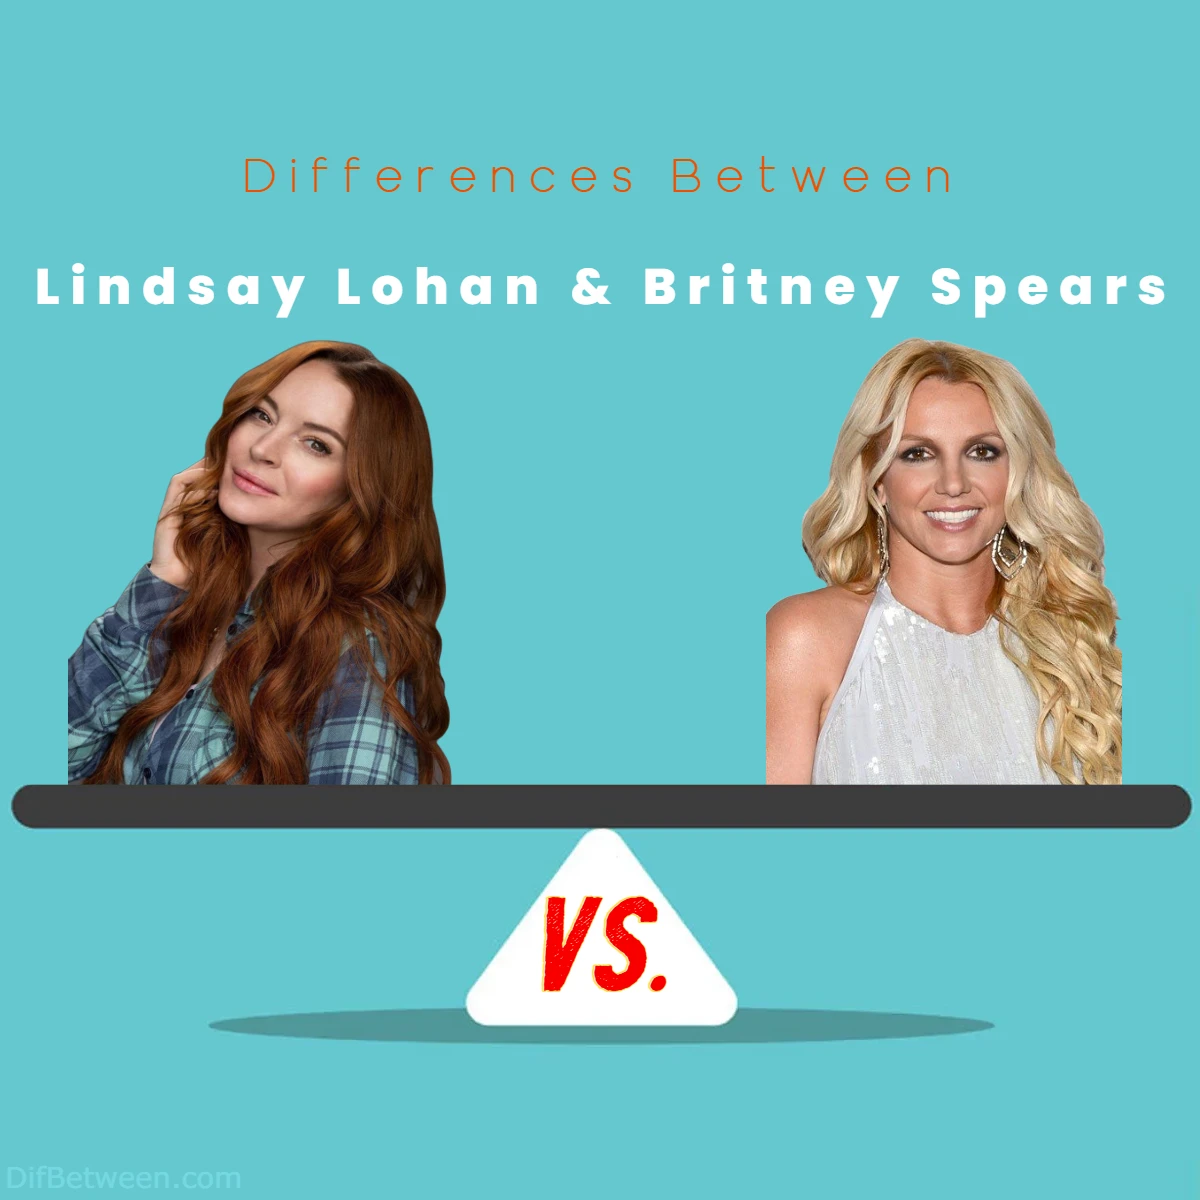 Differences Between Lindsay Lohan vs Britney Spears